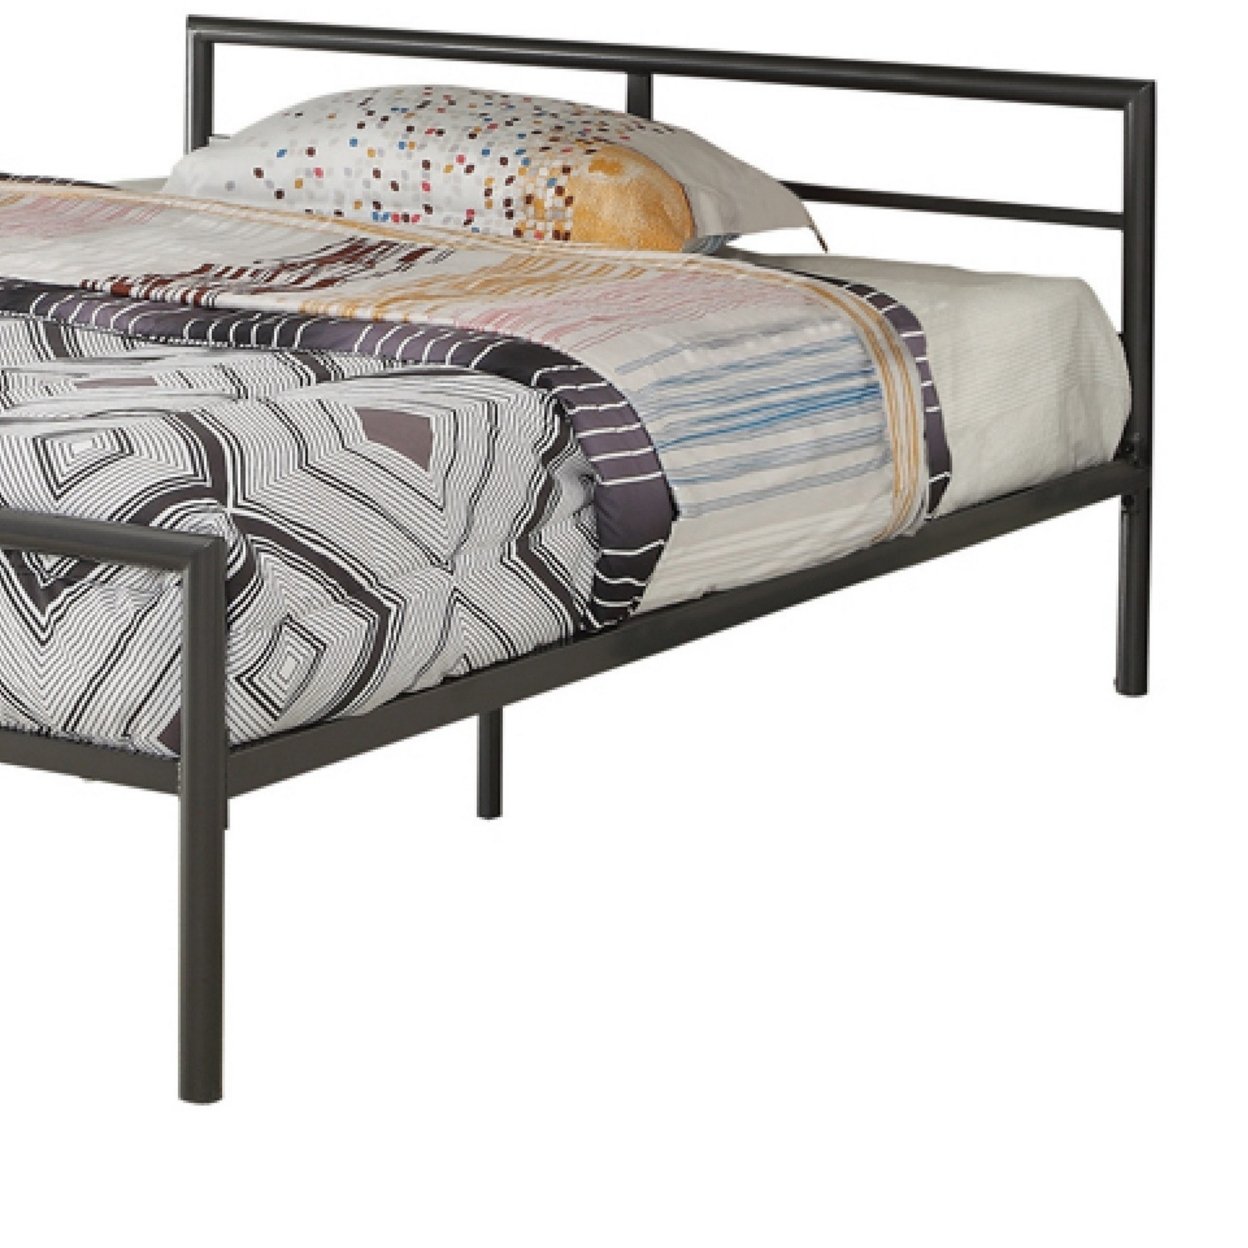 Traditional Styled Full Bed With Sleek Lines, Gray- Saltoro Sherpi